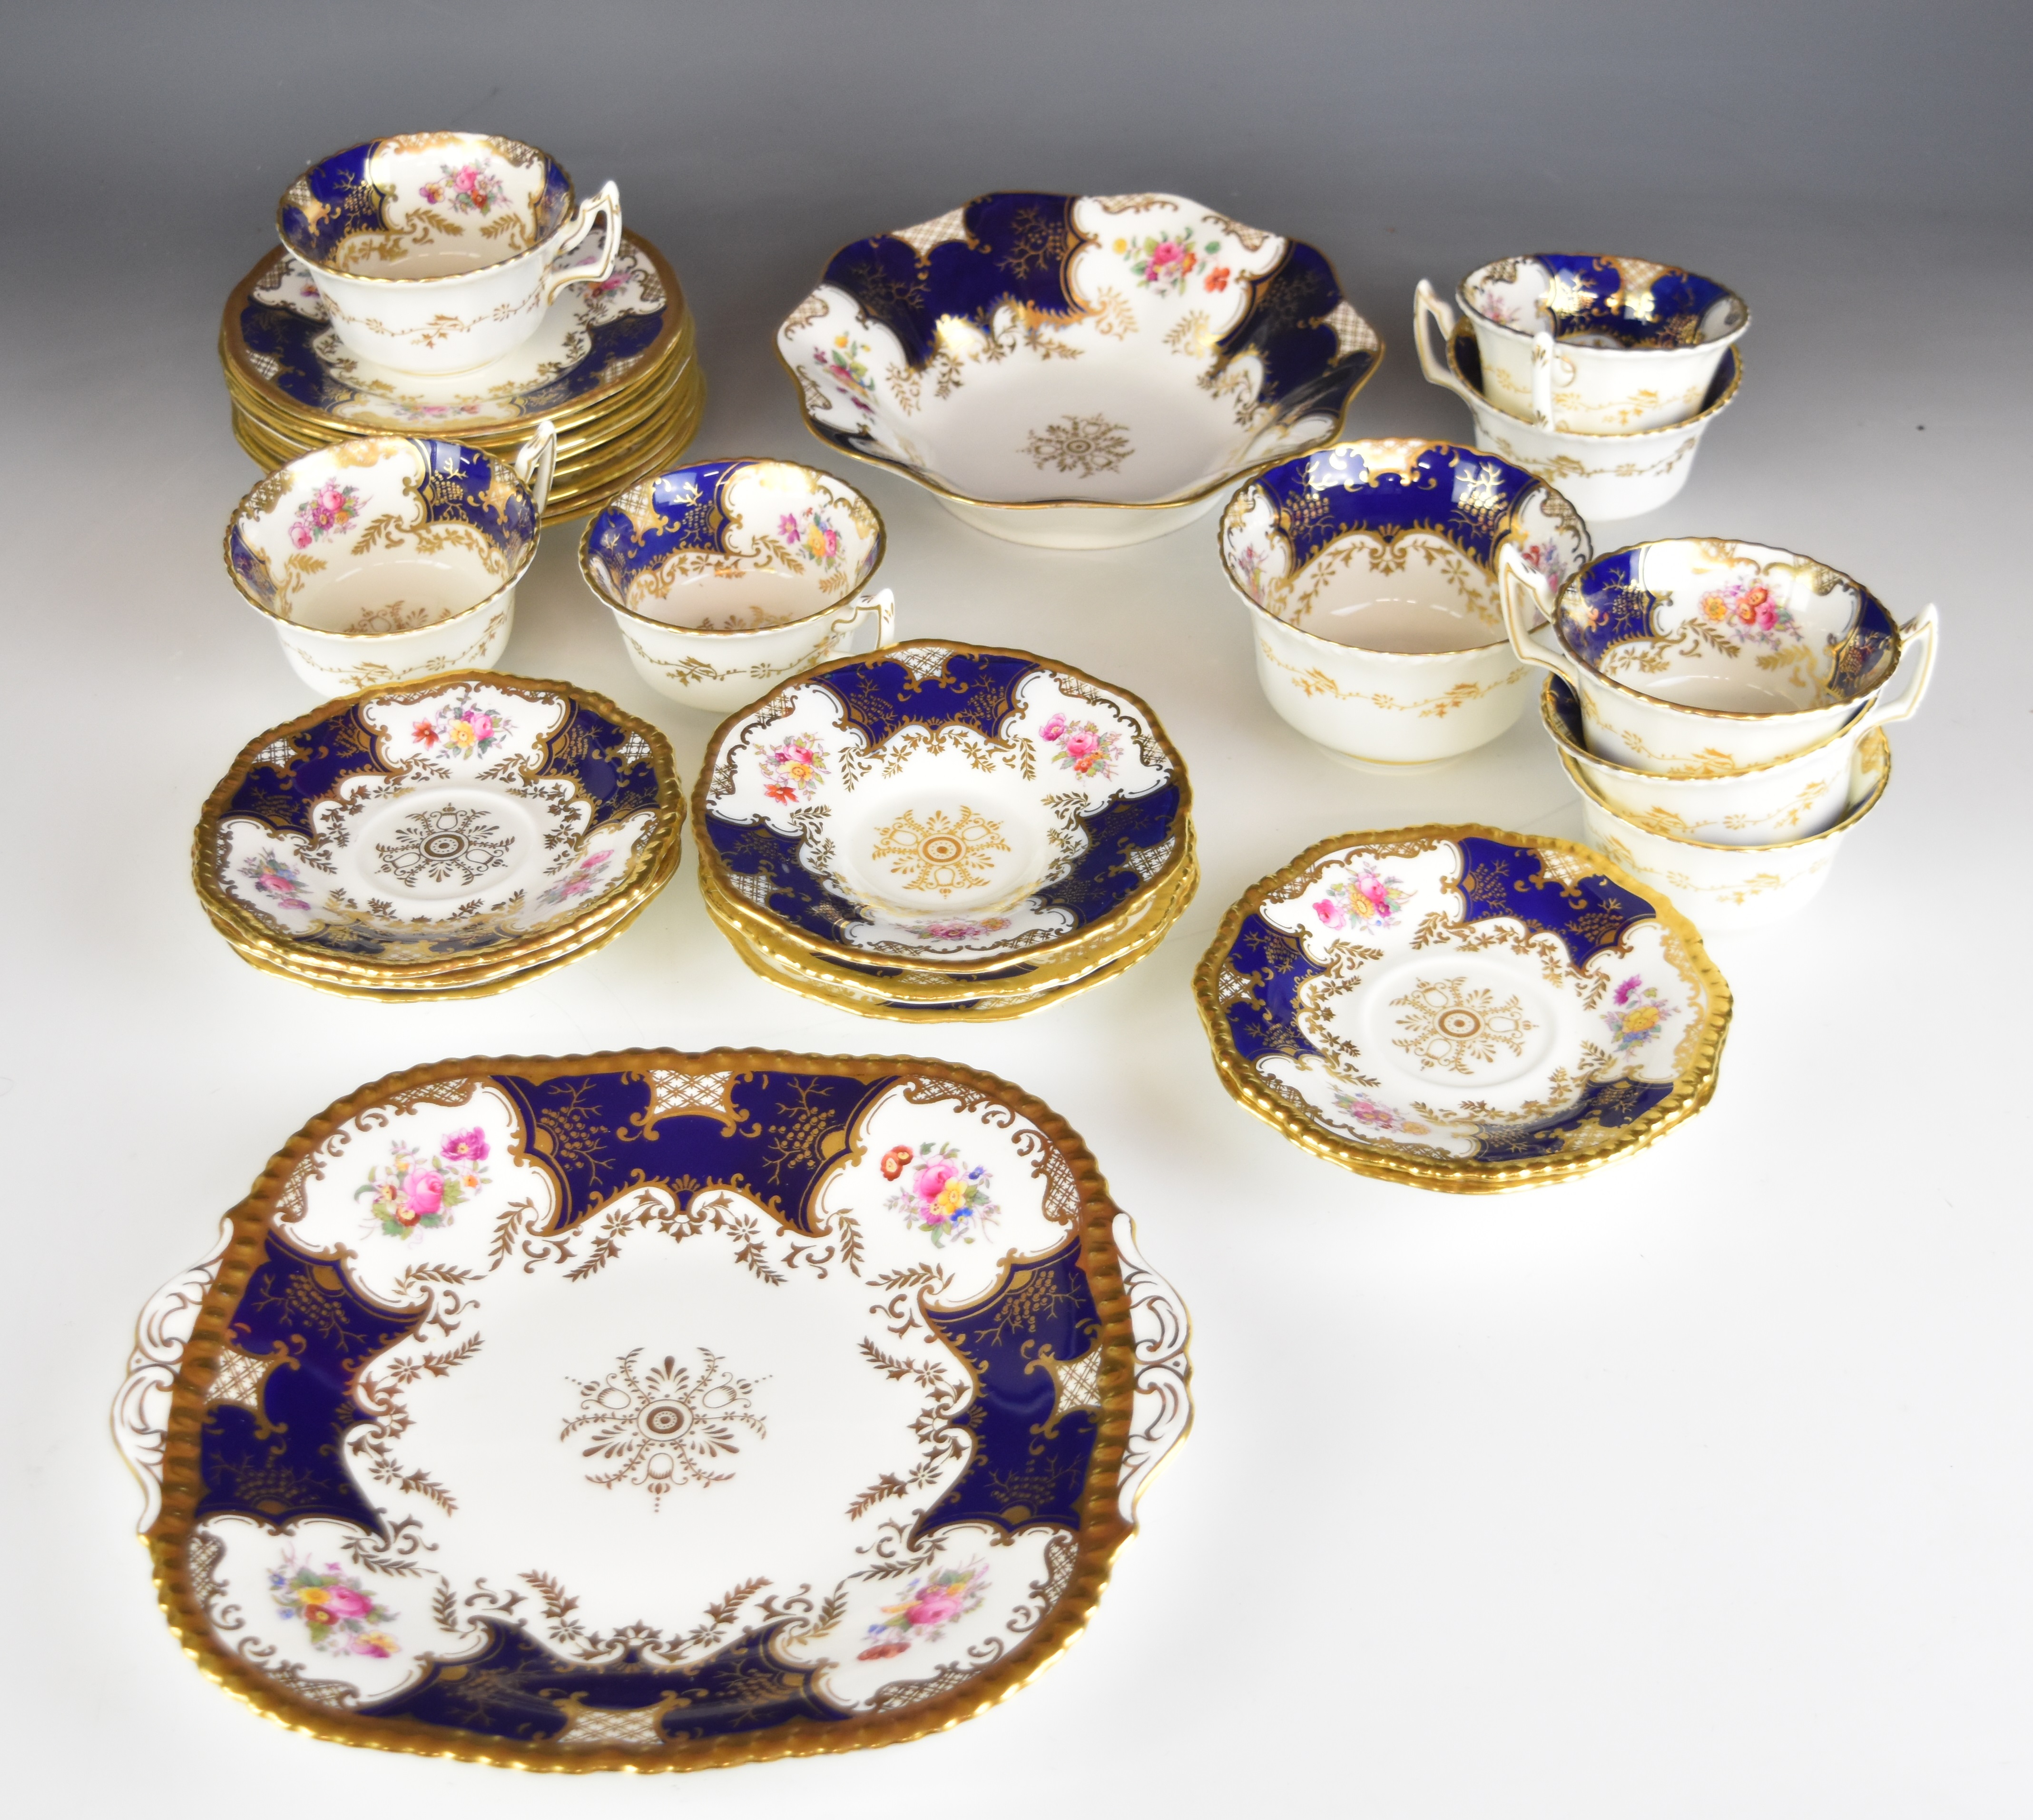 Coalport tea ware decorated in the Batwing pattern, approximately 27 pieces